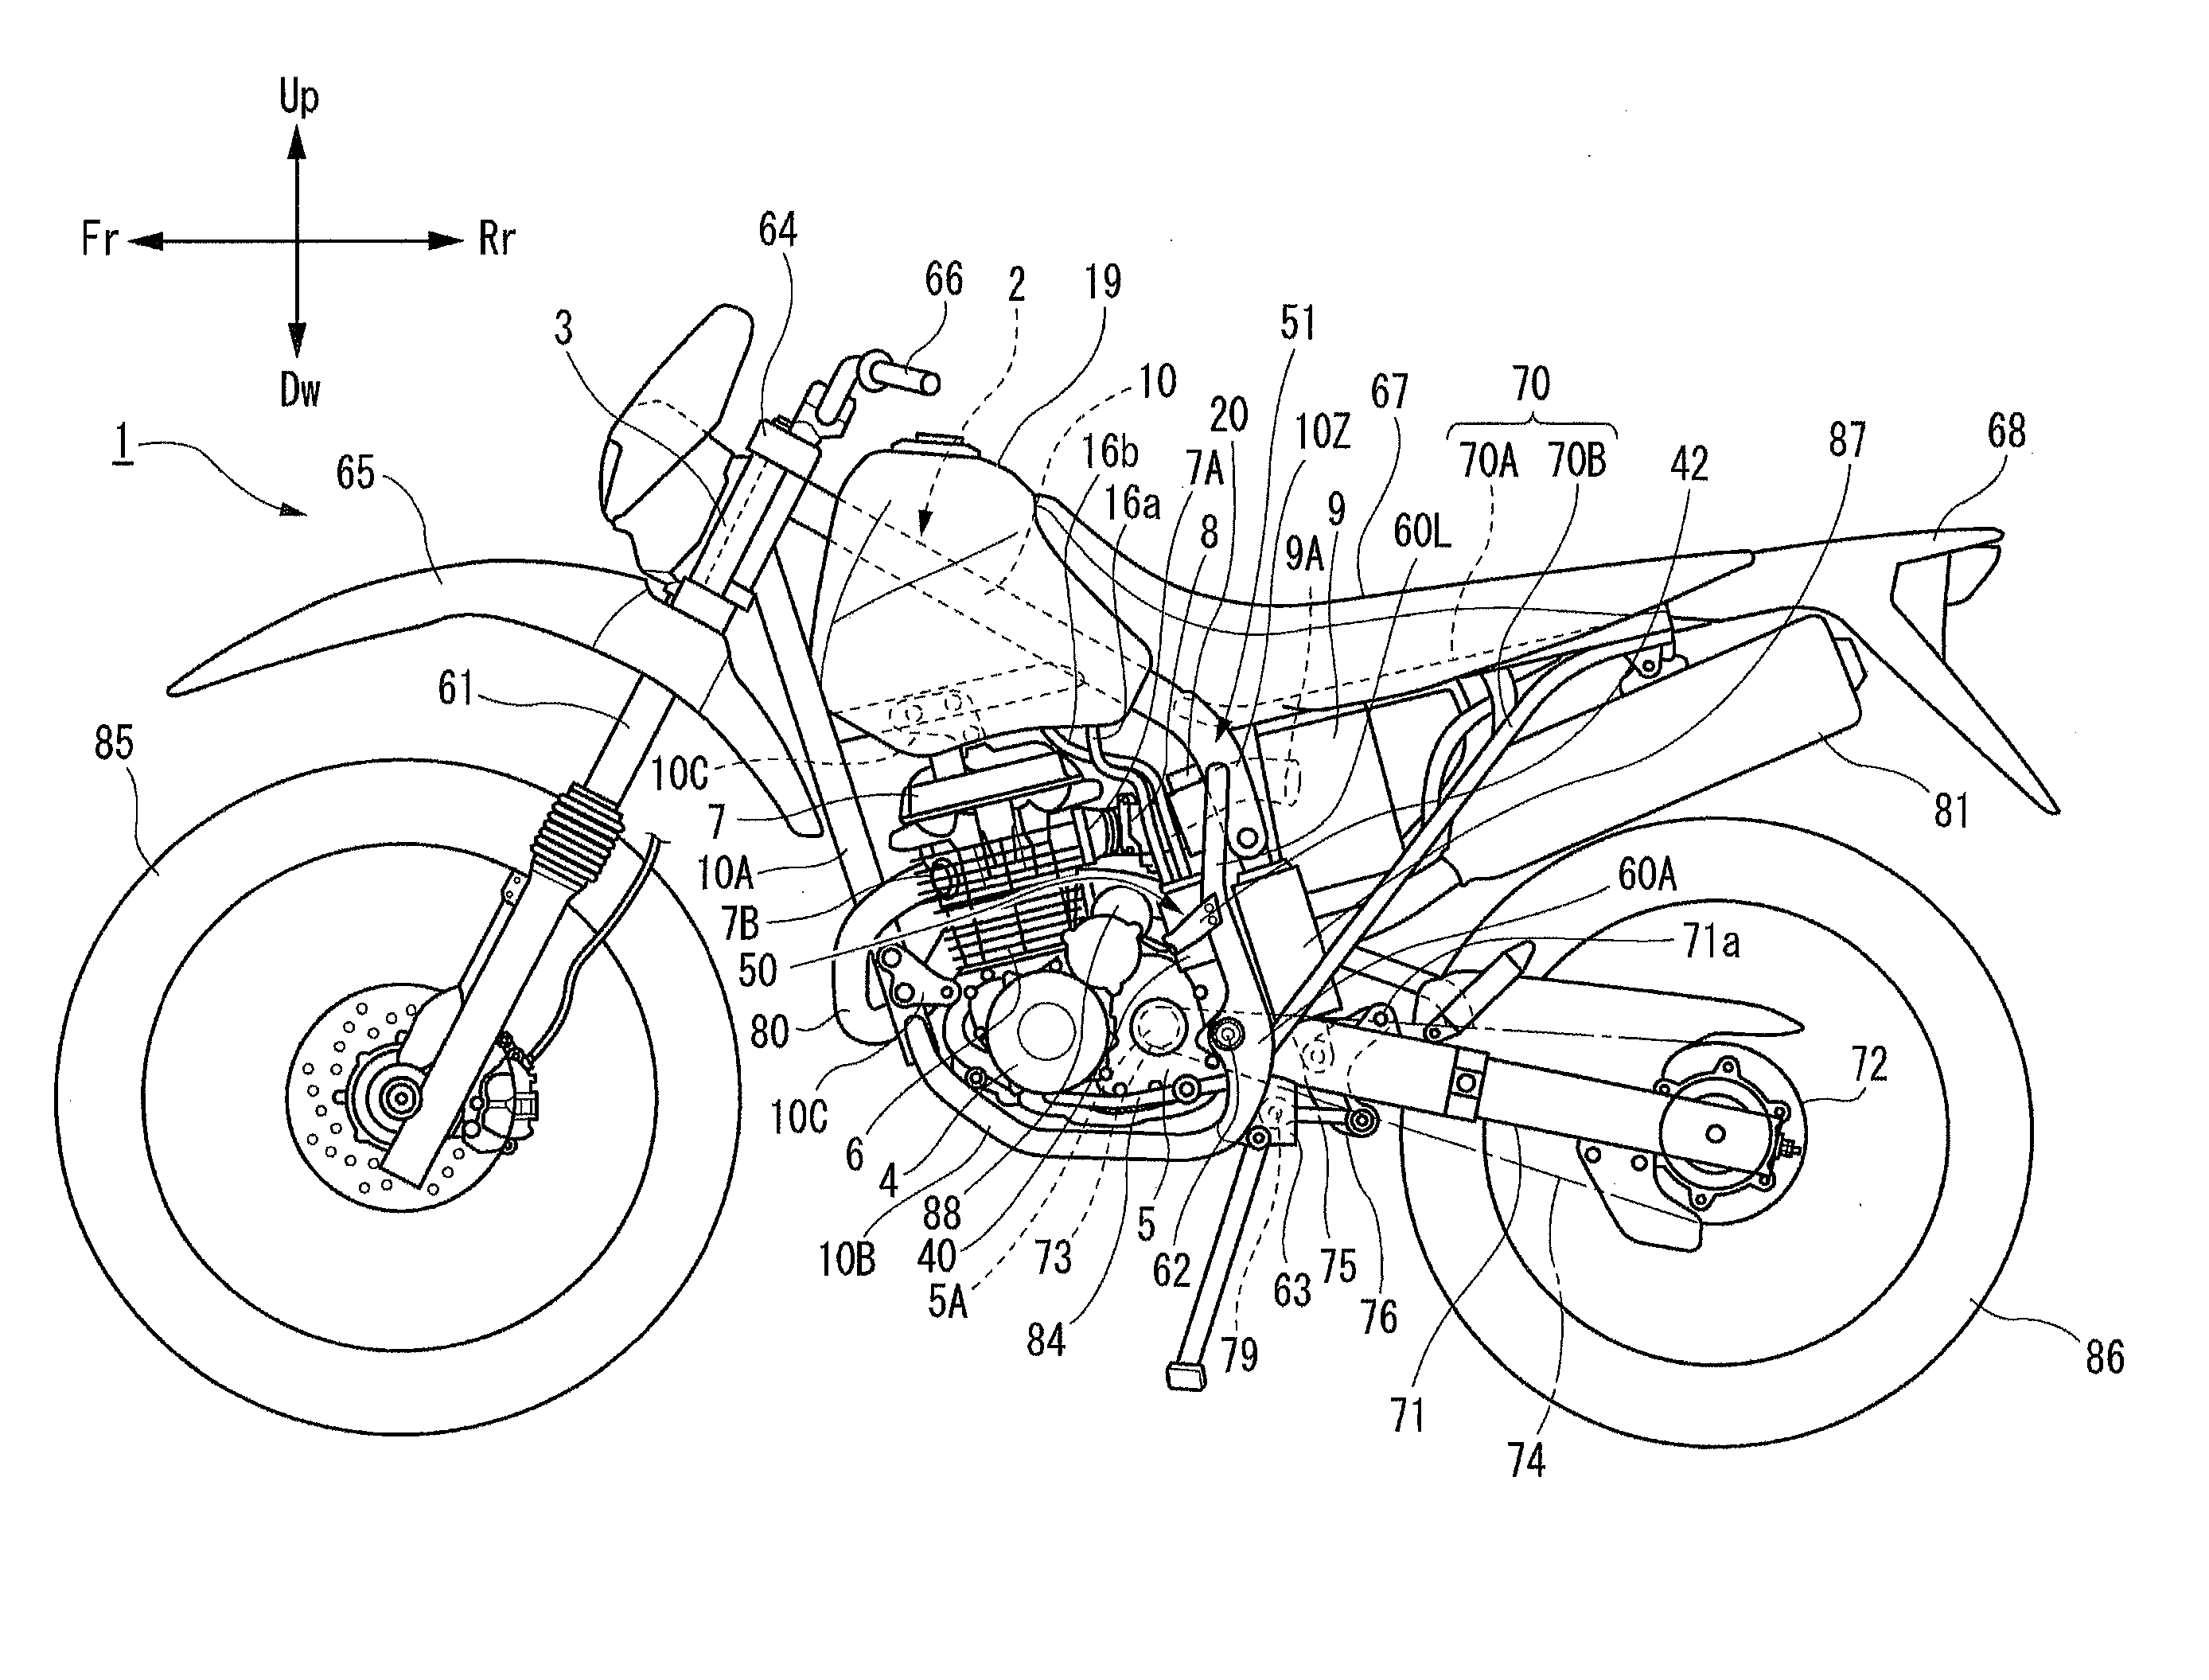 Fuel supply structure of saddle-ride type vehicle